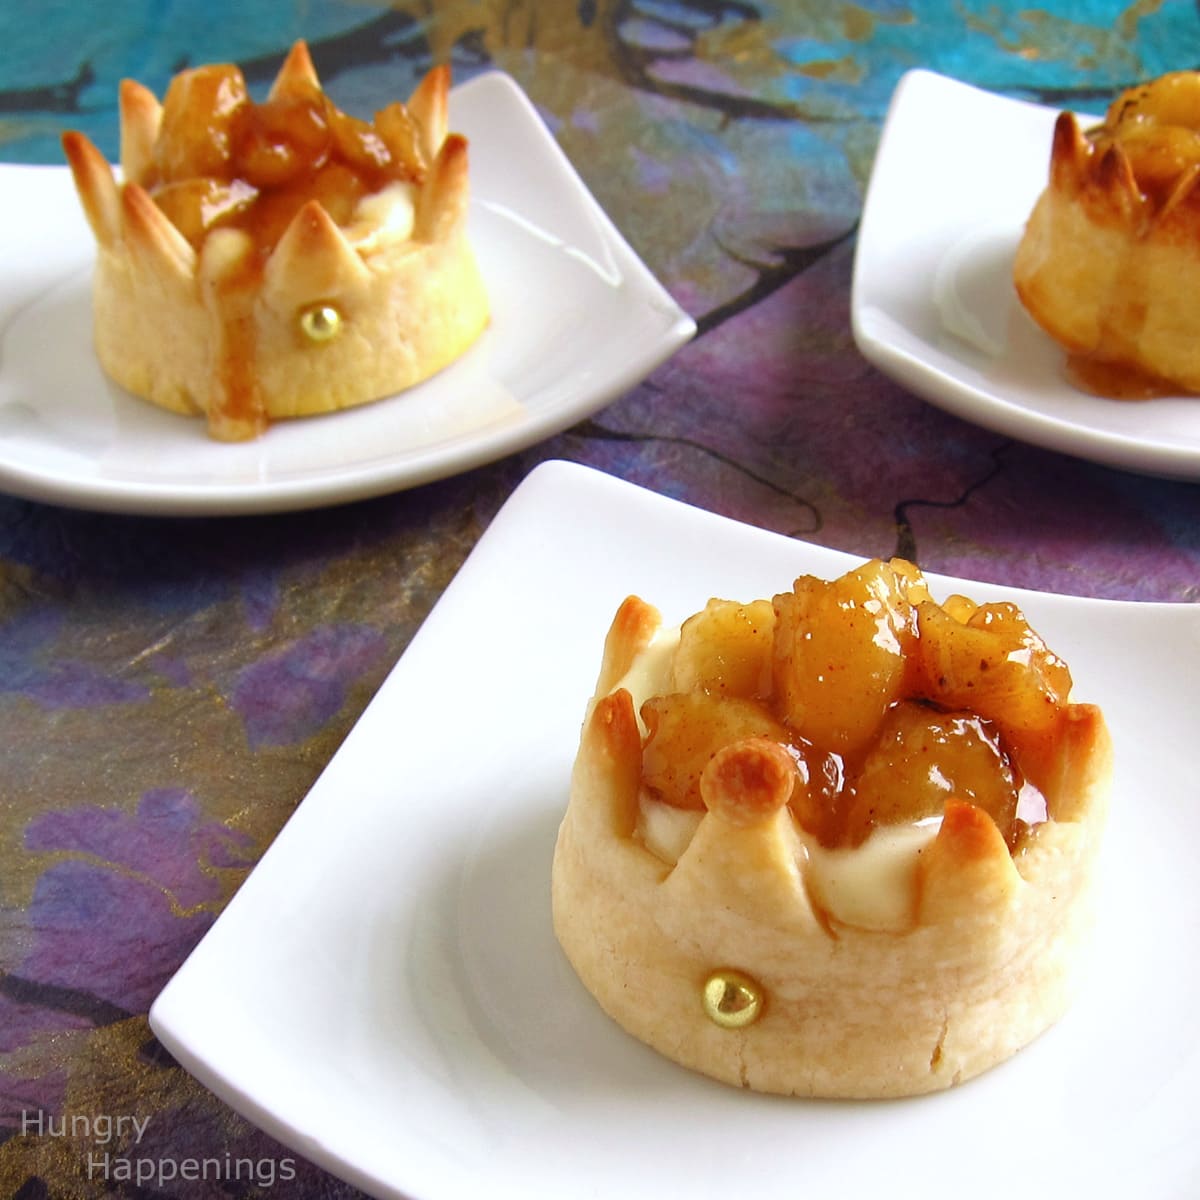 pastry crowns filled with cheesecake mousse and bananas foster.